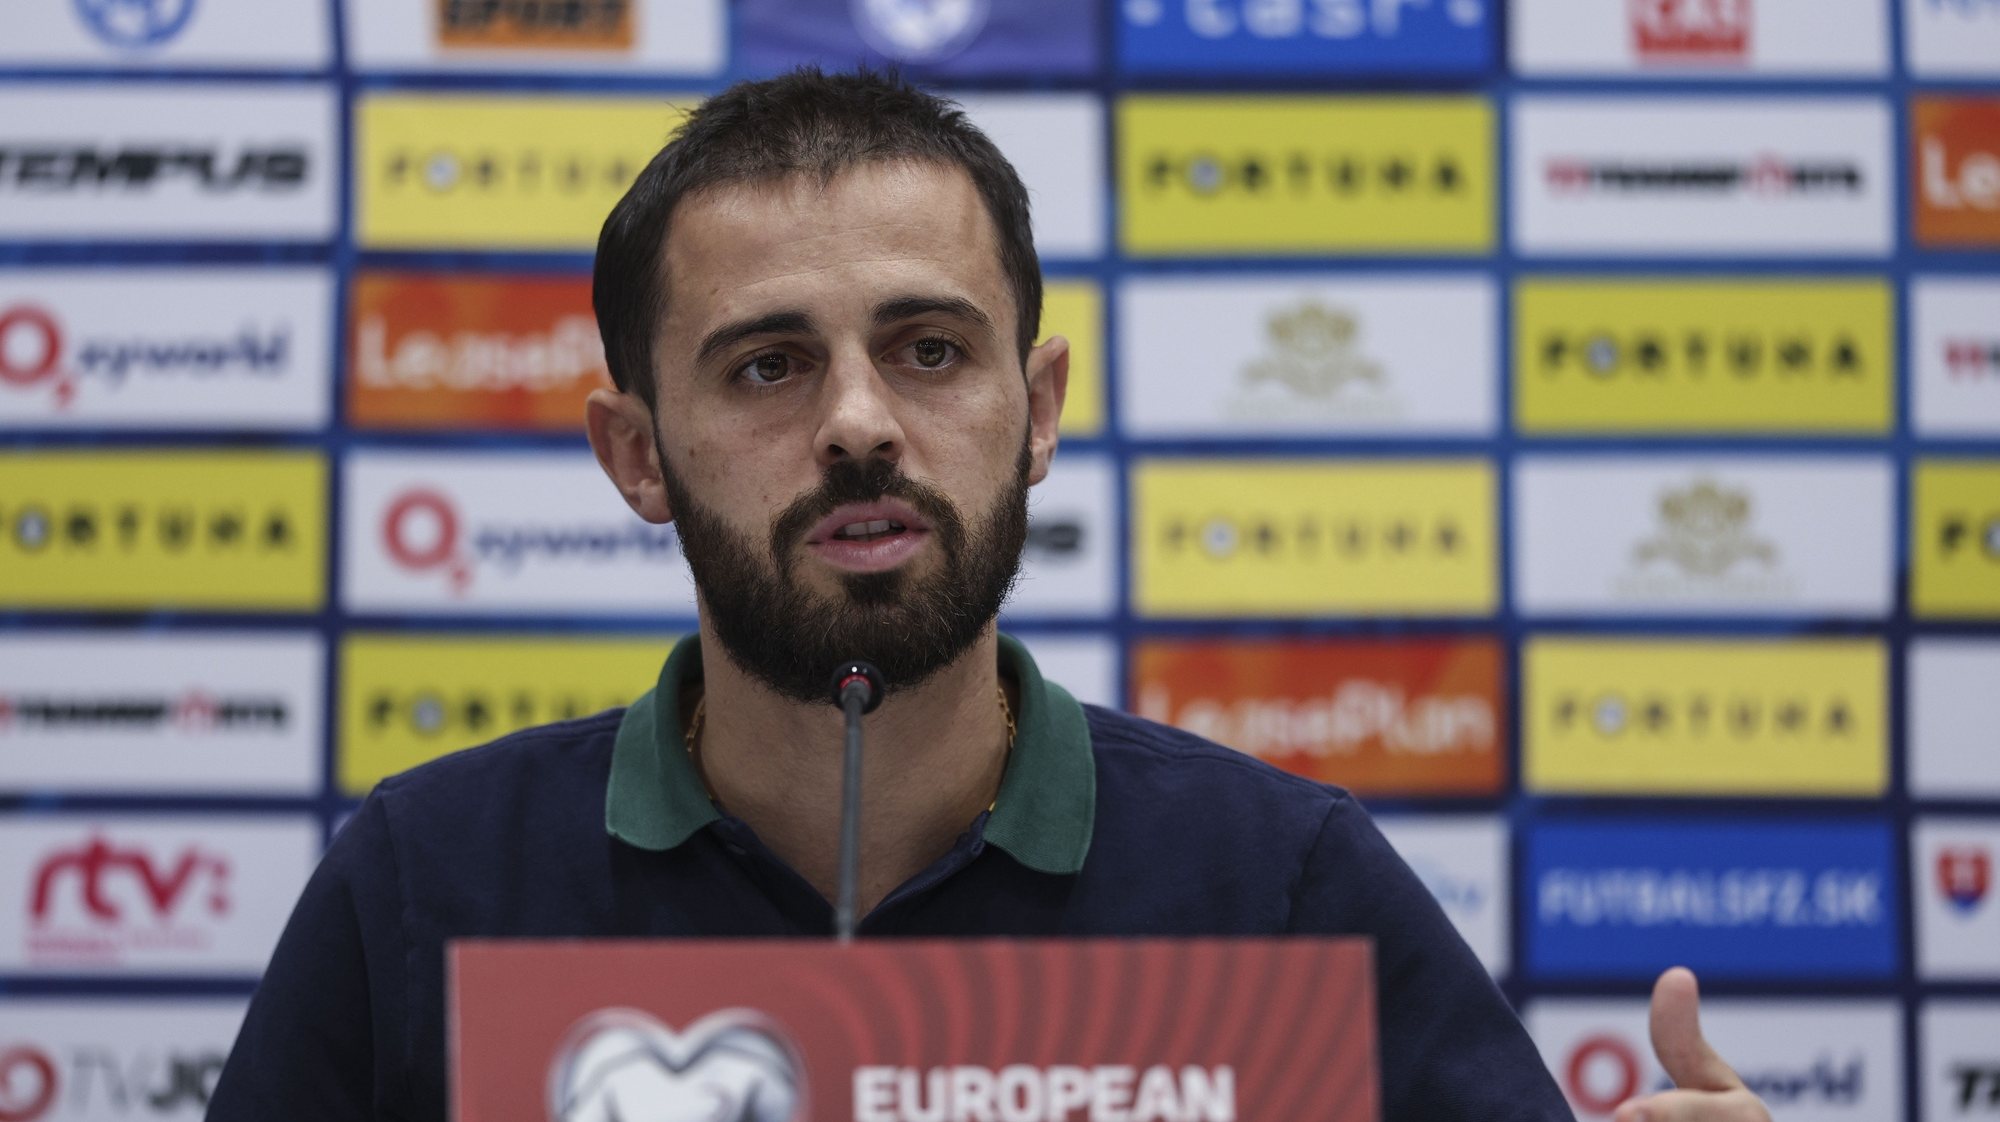 Portugal national team soccer player Bernardo Silva attends a press conference prior to tomorrows match against Slovakia for the qualifying stage for the UEFA Euro 2024, in Tehelne Pole Stadium in Bratislava, Slovakia 07 September 2023. Portugal is preparing for the matches against Slovakia and Luxembourg for UEFA EURO 2024 qualifiers. MIGUEL A. LOPES/LUSA